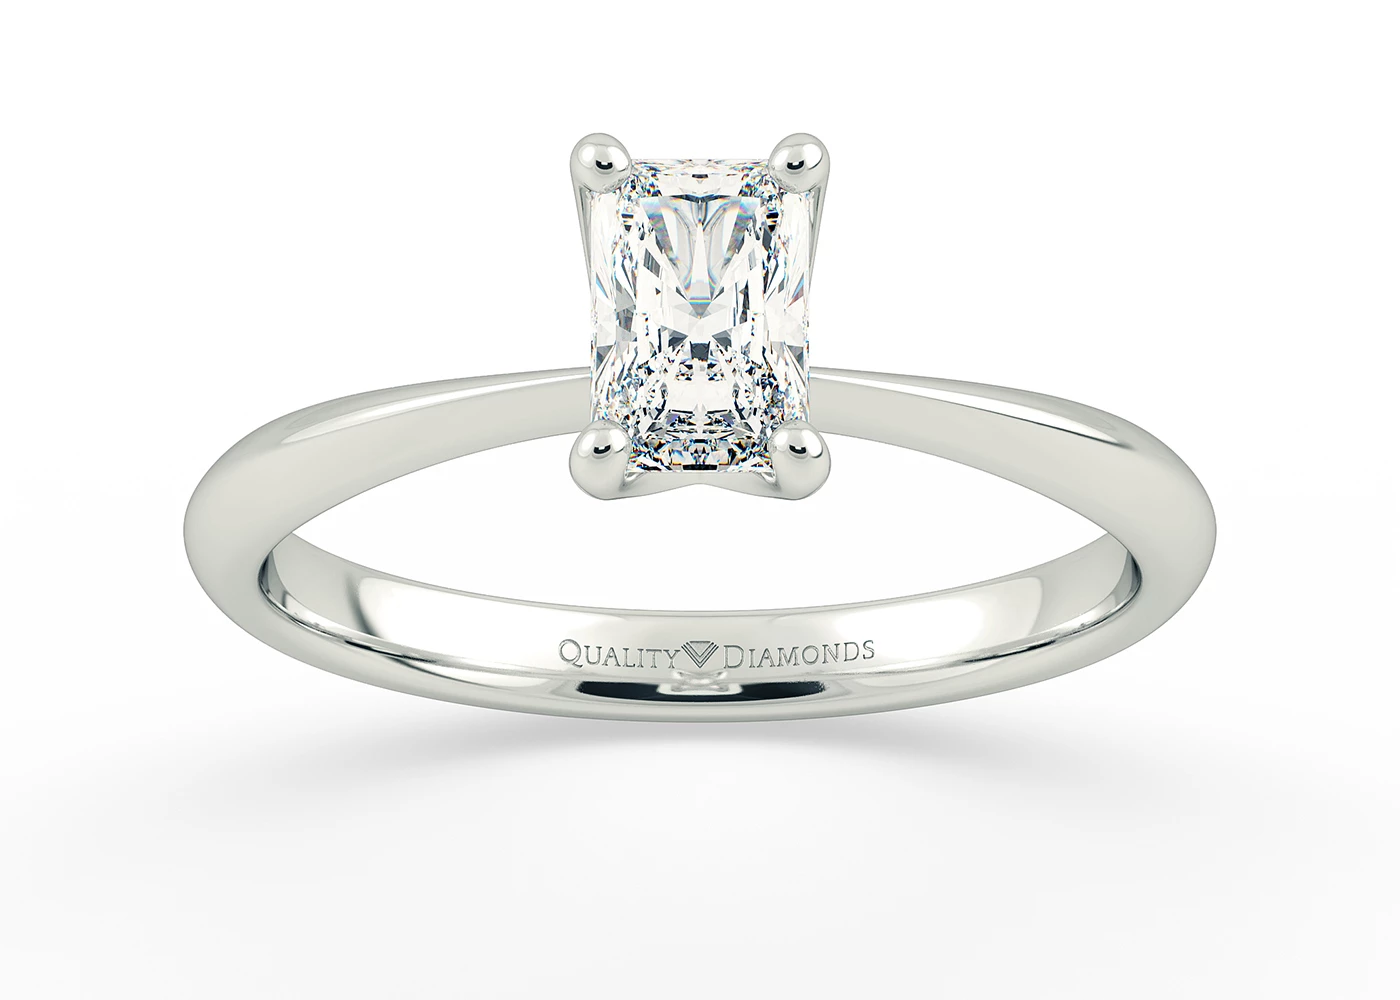 One Carat Radiant Solitaire Diamond Engagement Ring in 18K White Gold